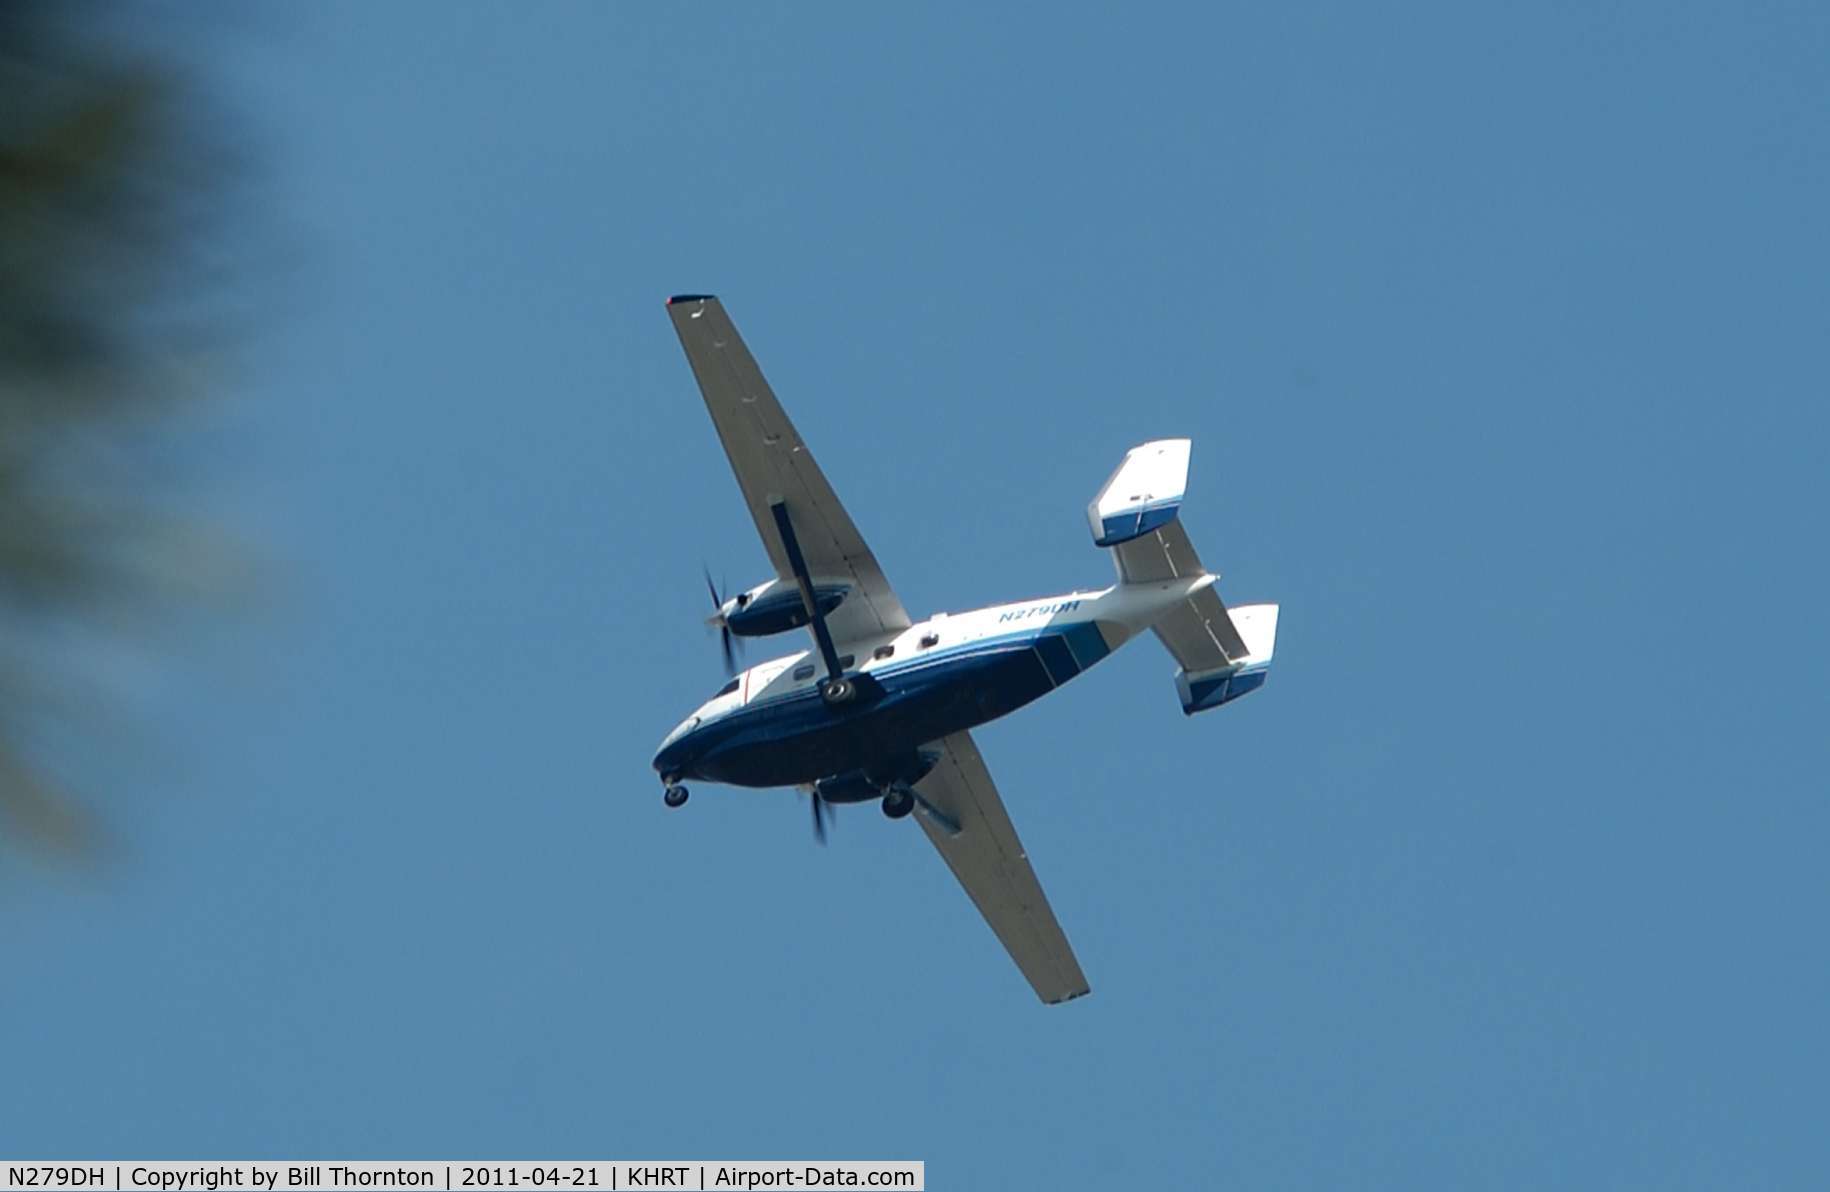 N279DH, PZL-Mielec M-28-05 Skytruck C/N AJE003-21, A Polskie Zaklady Lotnicze Spzoo PZL M28 05 flying west over Ft. Walton Beach, Fla. presumably back to Hurlburt Field. According to Airport Data.com, a website that this photgrapher contributes to this M28 is owned by Air Force Special Operations Command.